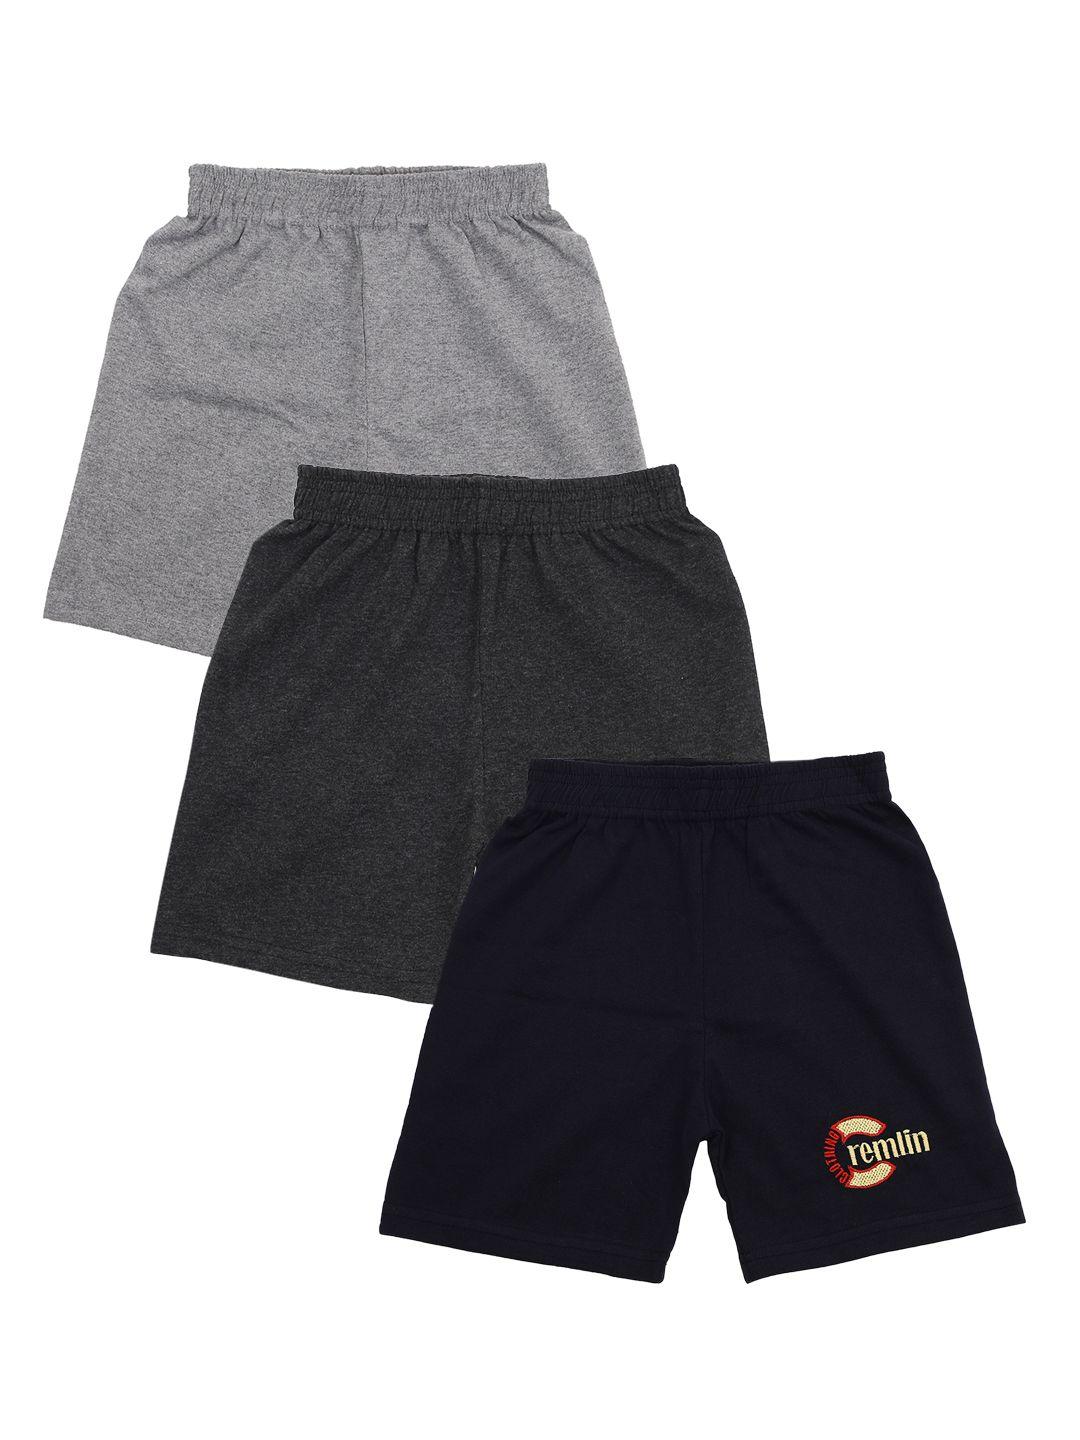 cremlin clothing unisex kids grey & charcoal pack of 3 shorts